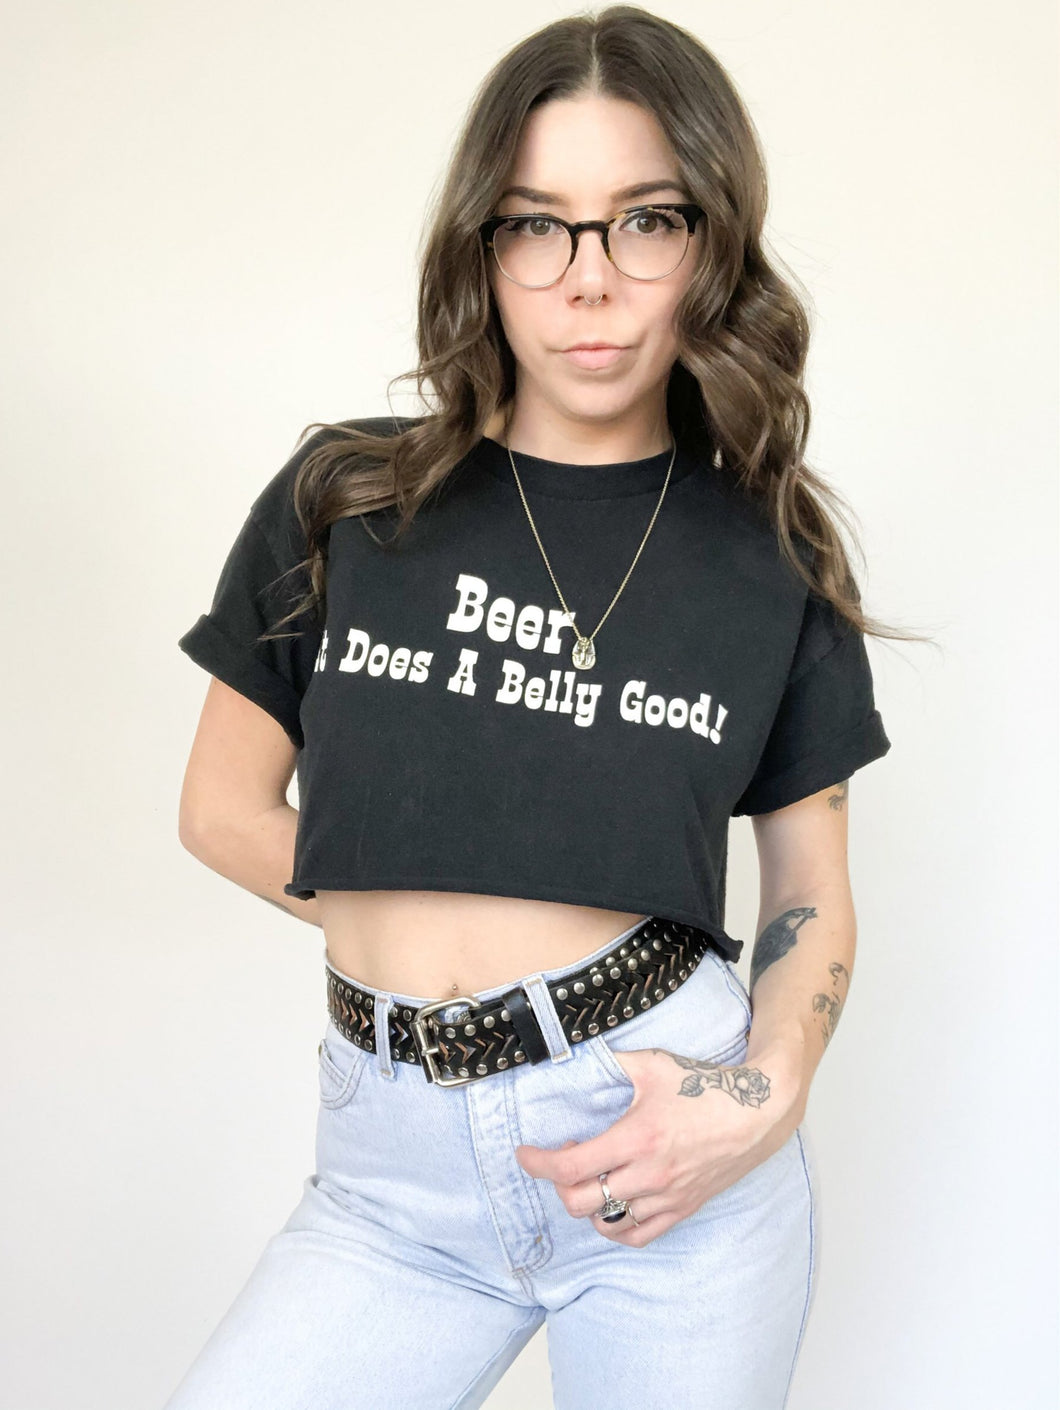 Vintage ‘Beer, It Does A Belly Good!’ Cropped Tee Size M